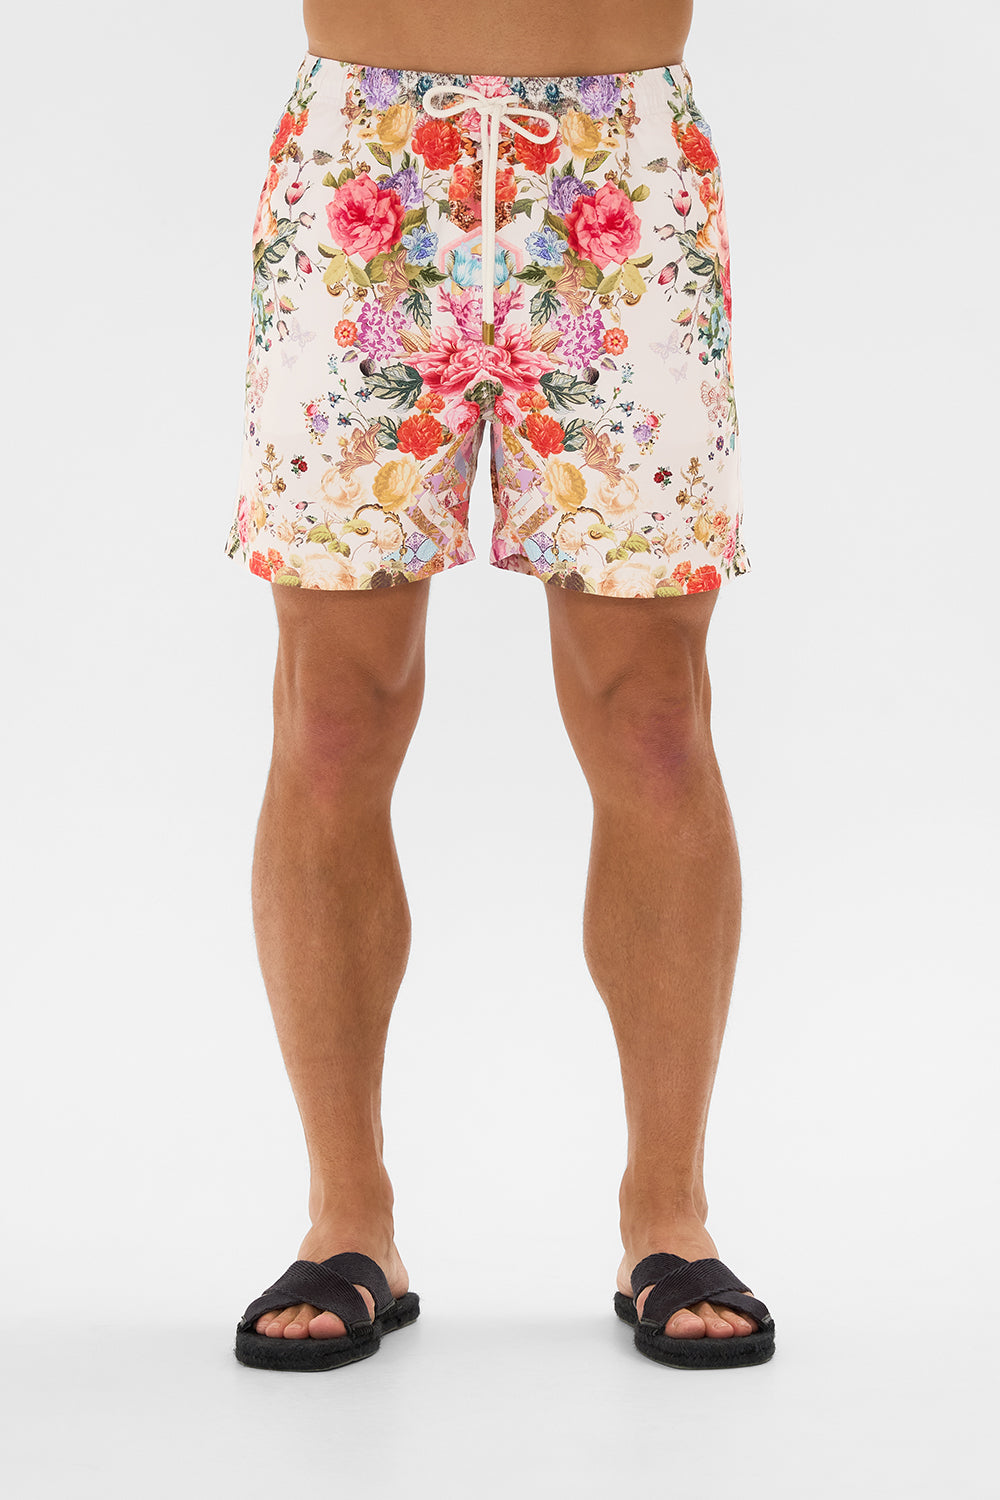 Hotel Franks by CAMILLA floral mid length boardshort in Sew Yesterday